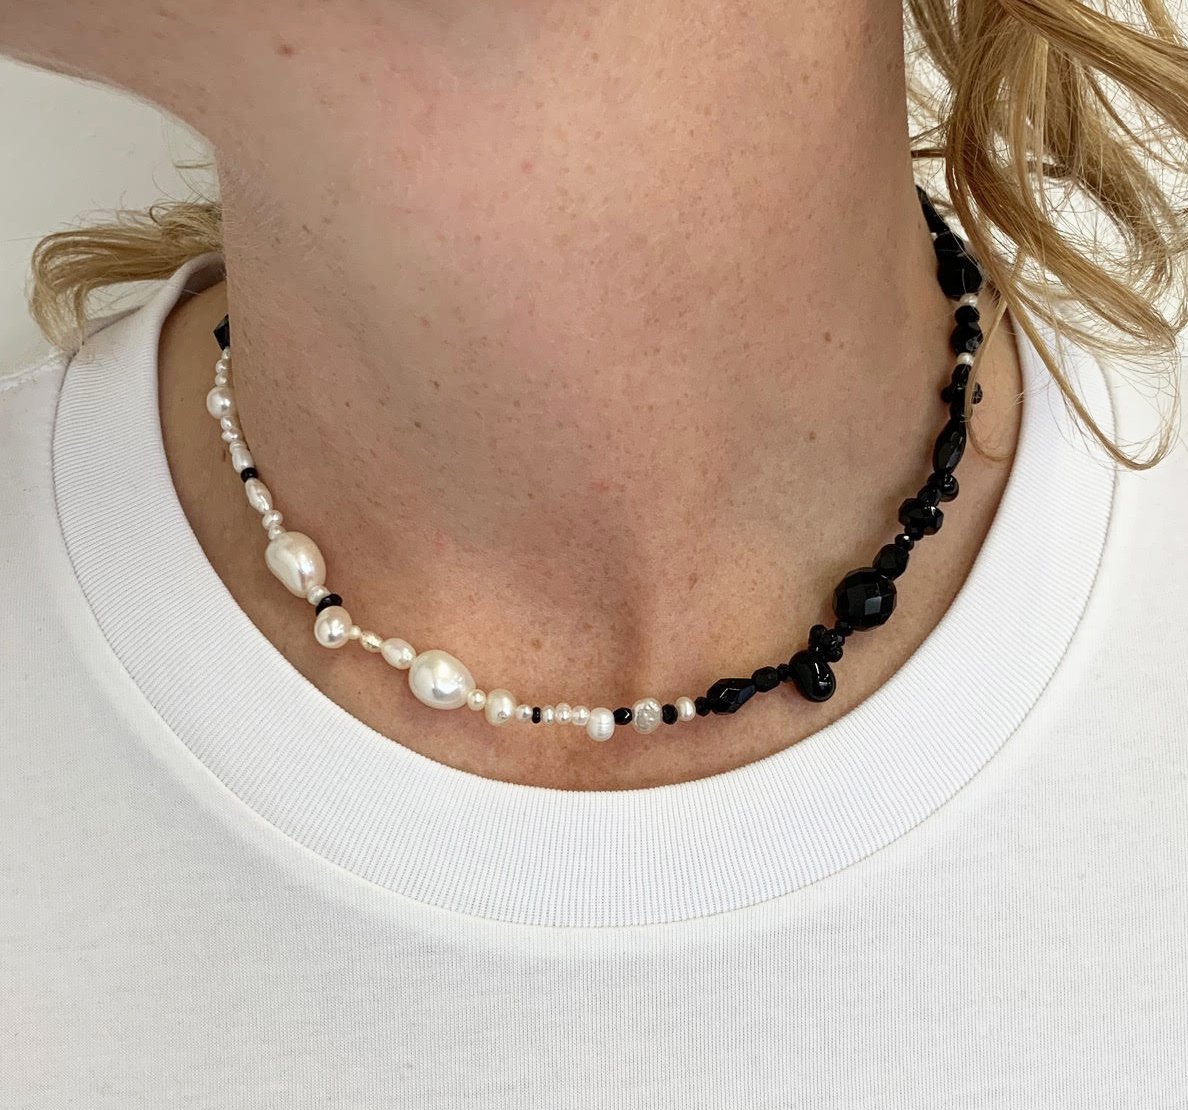 How to Fix a Broken Pearl Necklace in 5 Easy Steps